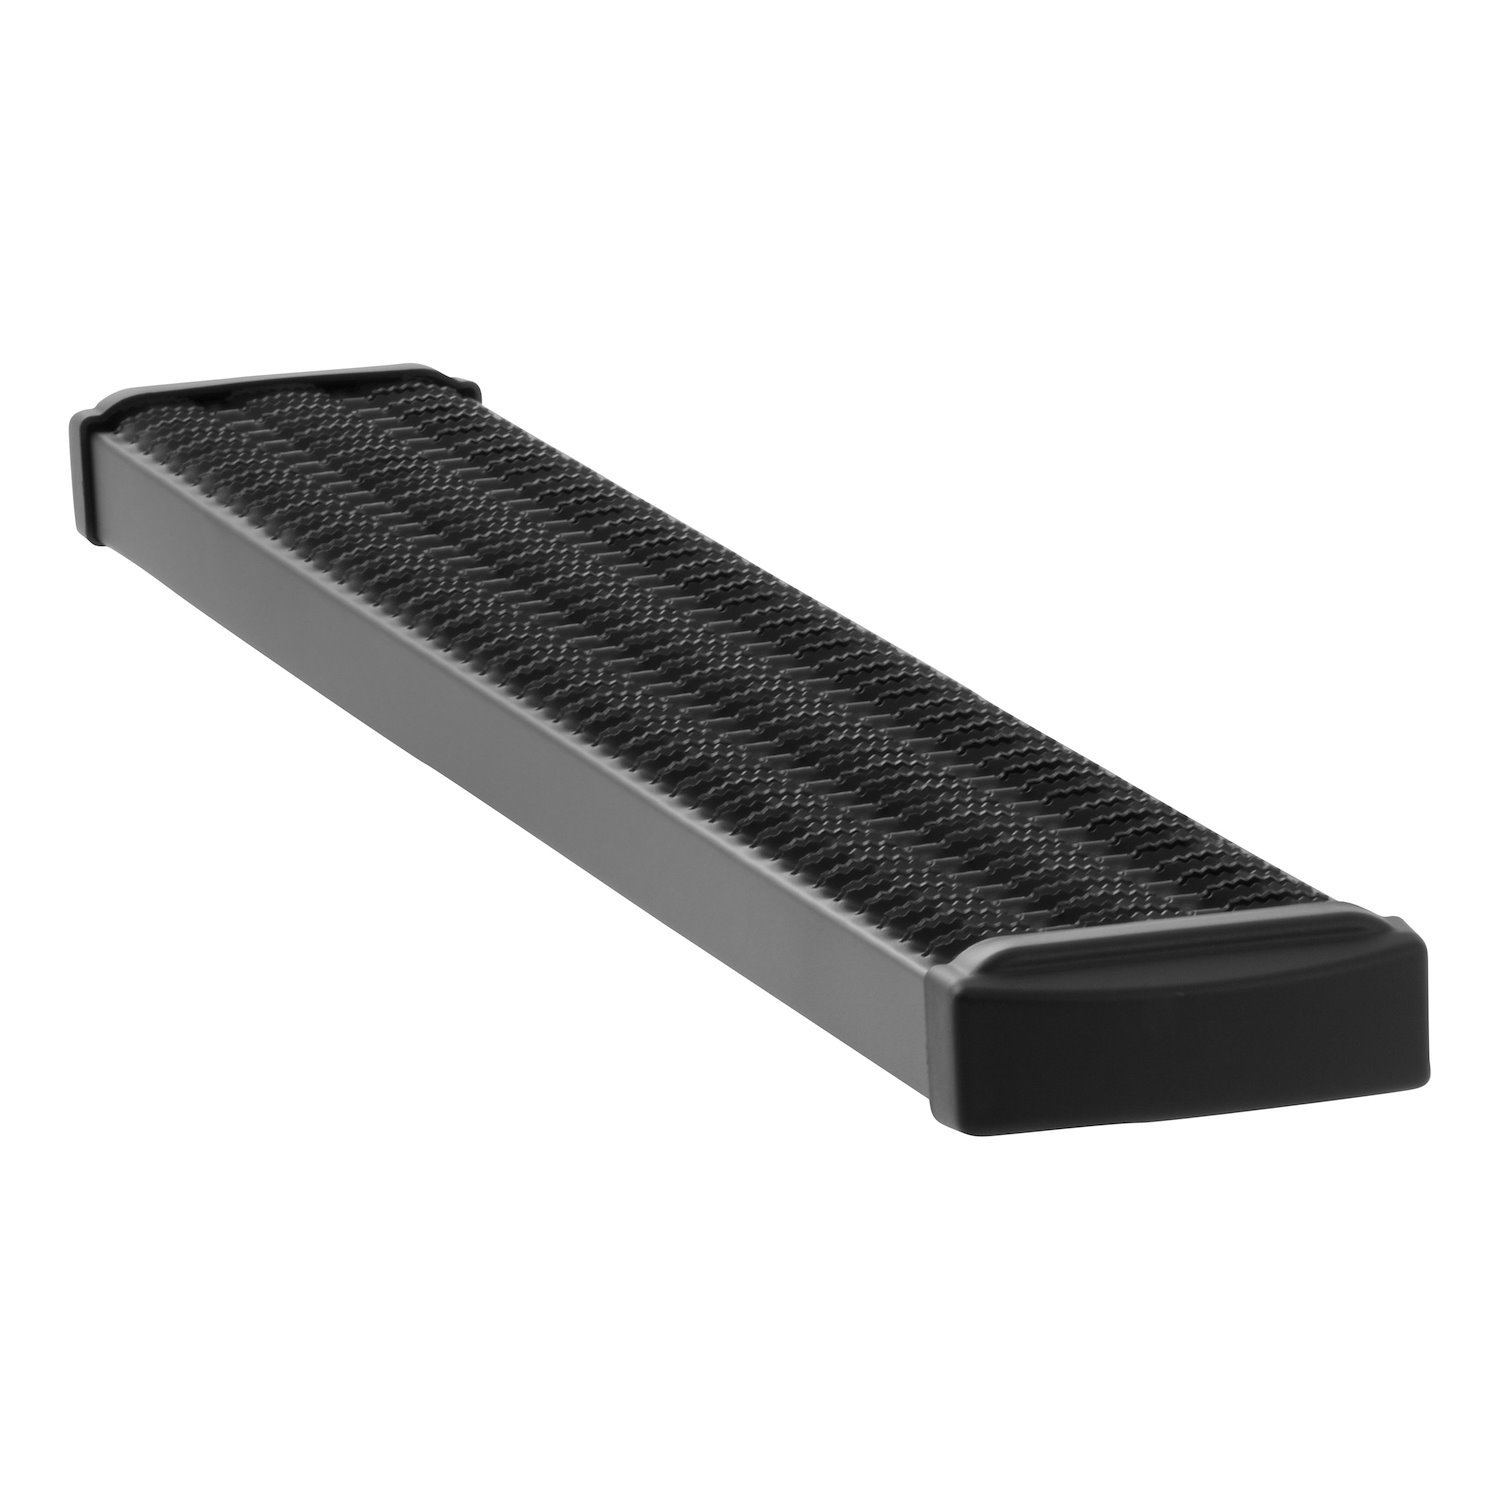 415254-401473 Grip Step 7 in. x 54 in. Black Aluminum Passenger-Side Running Board Fits Select ProMaster